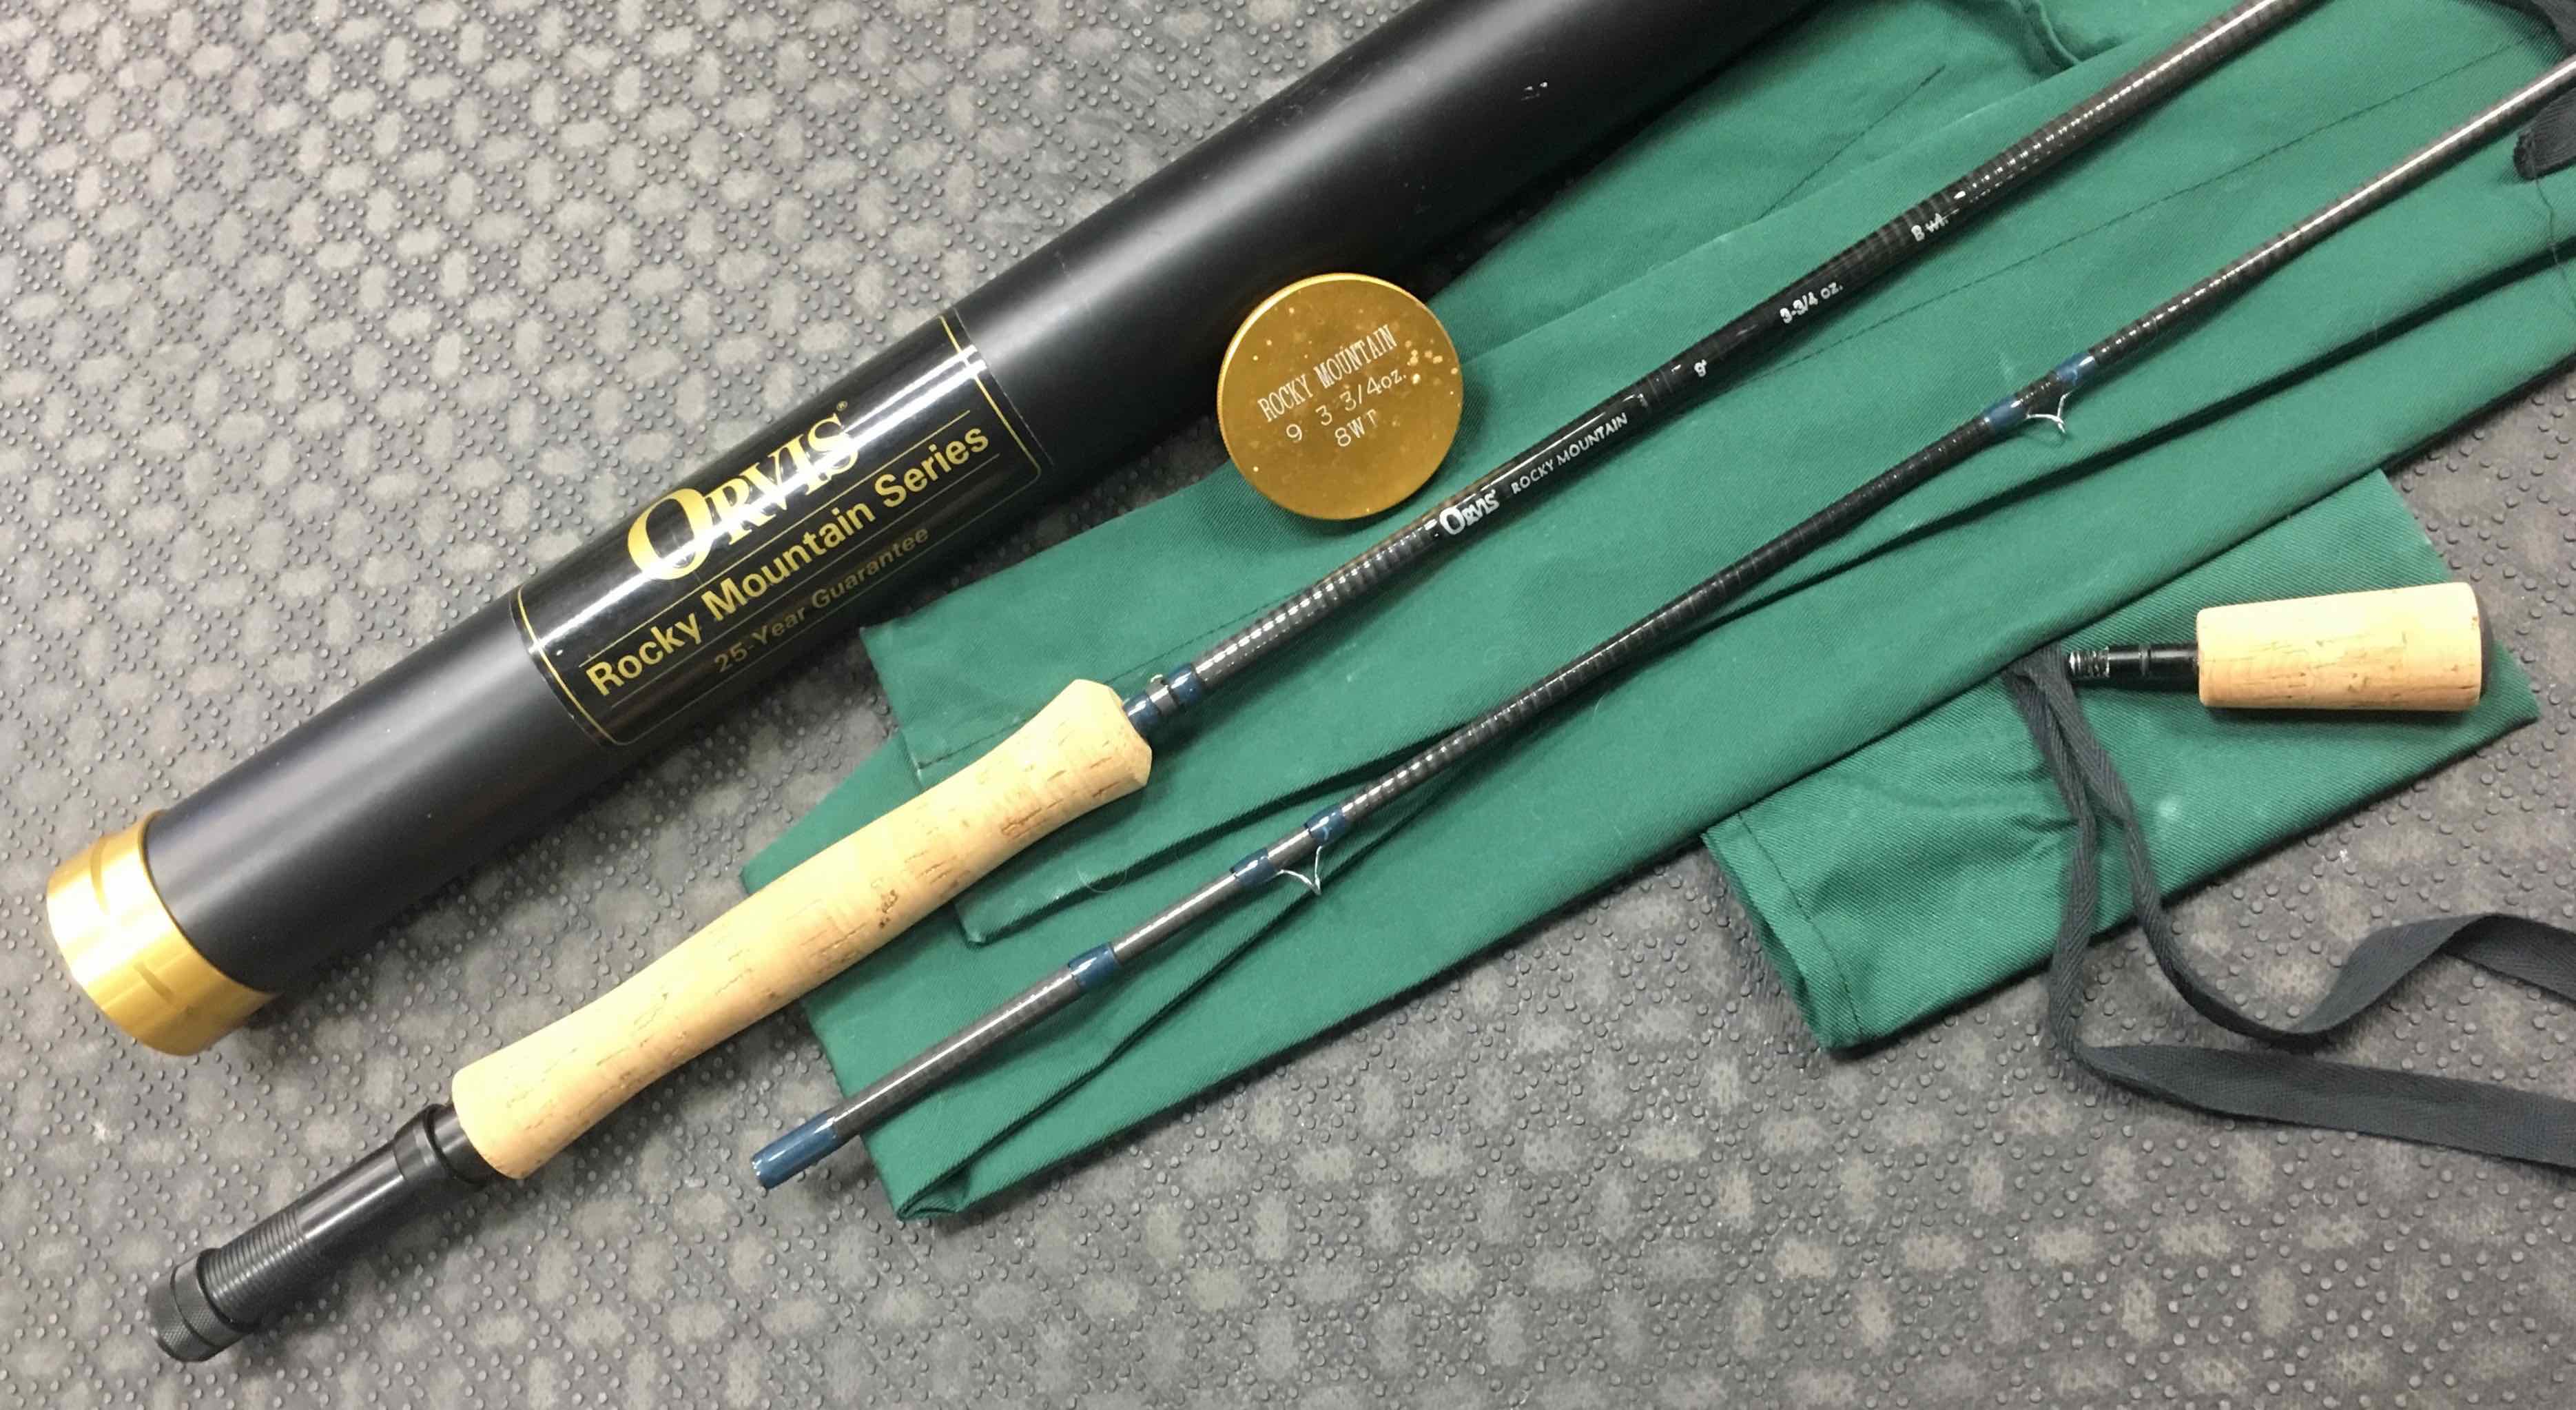 https://thefirstcast.ca/wp-content/uploads/2017/03/Orvis-Rocky-Mountian-Series-9-foot-8-weight-3-34-oz-2-pc-Fly-Rod-with-Fighting-Butt-BB.jpg